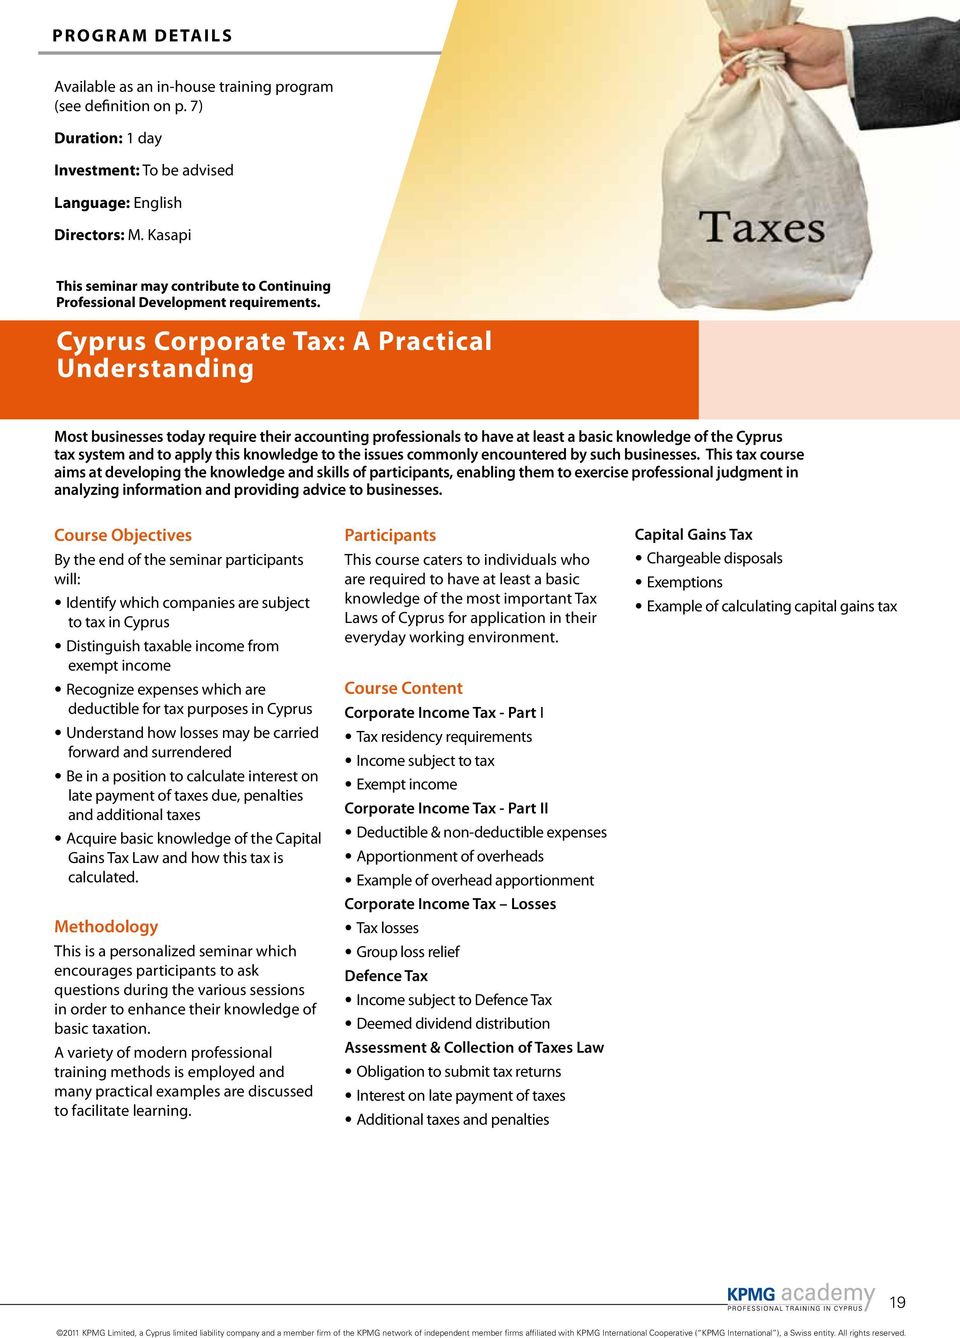 Cyprus Corporate Tax: A Practical Understanding Most businesses today require their accounting professionals to have at least a basic knowledge of the Cyprus tax system and to apply this knowledge to